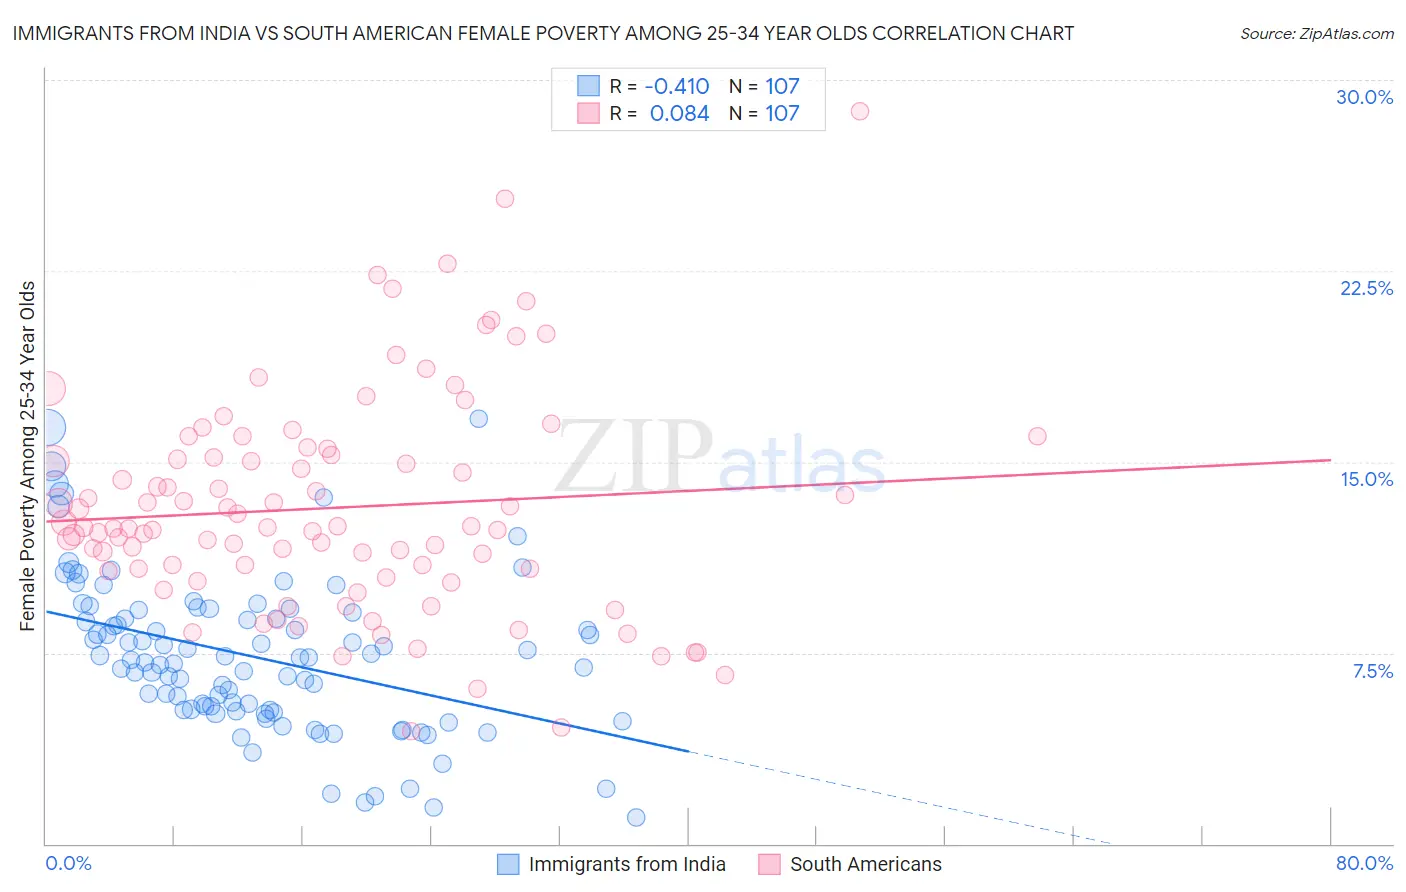 Immigrants from India vs South American Female Poverty Among 25-34 Year Olds